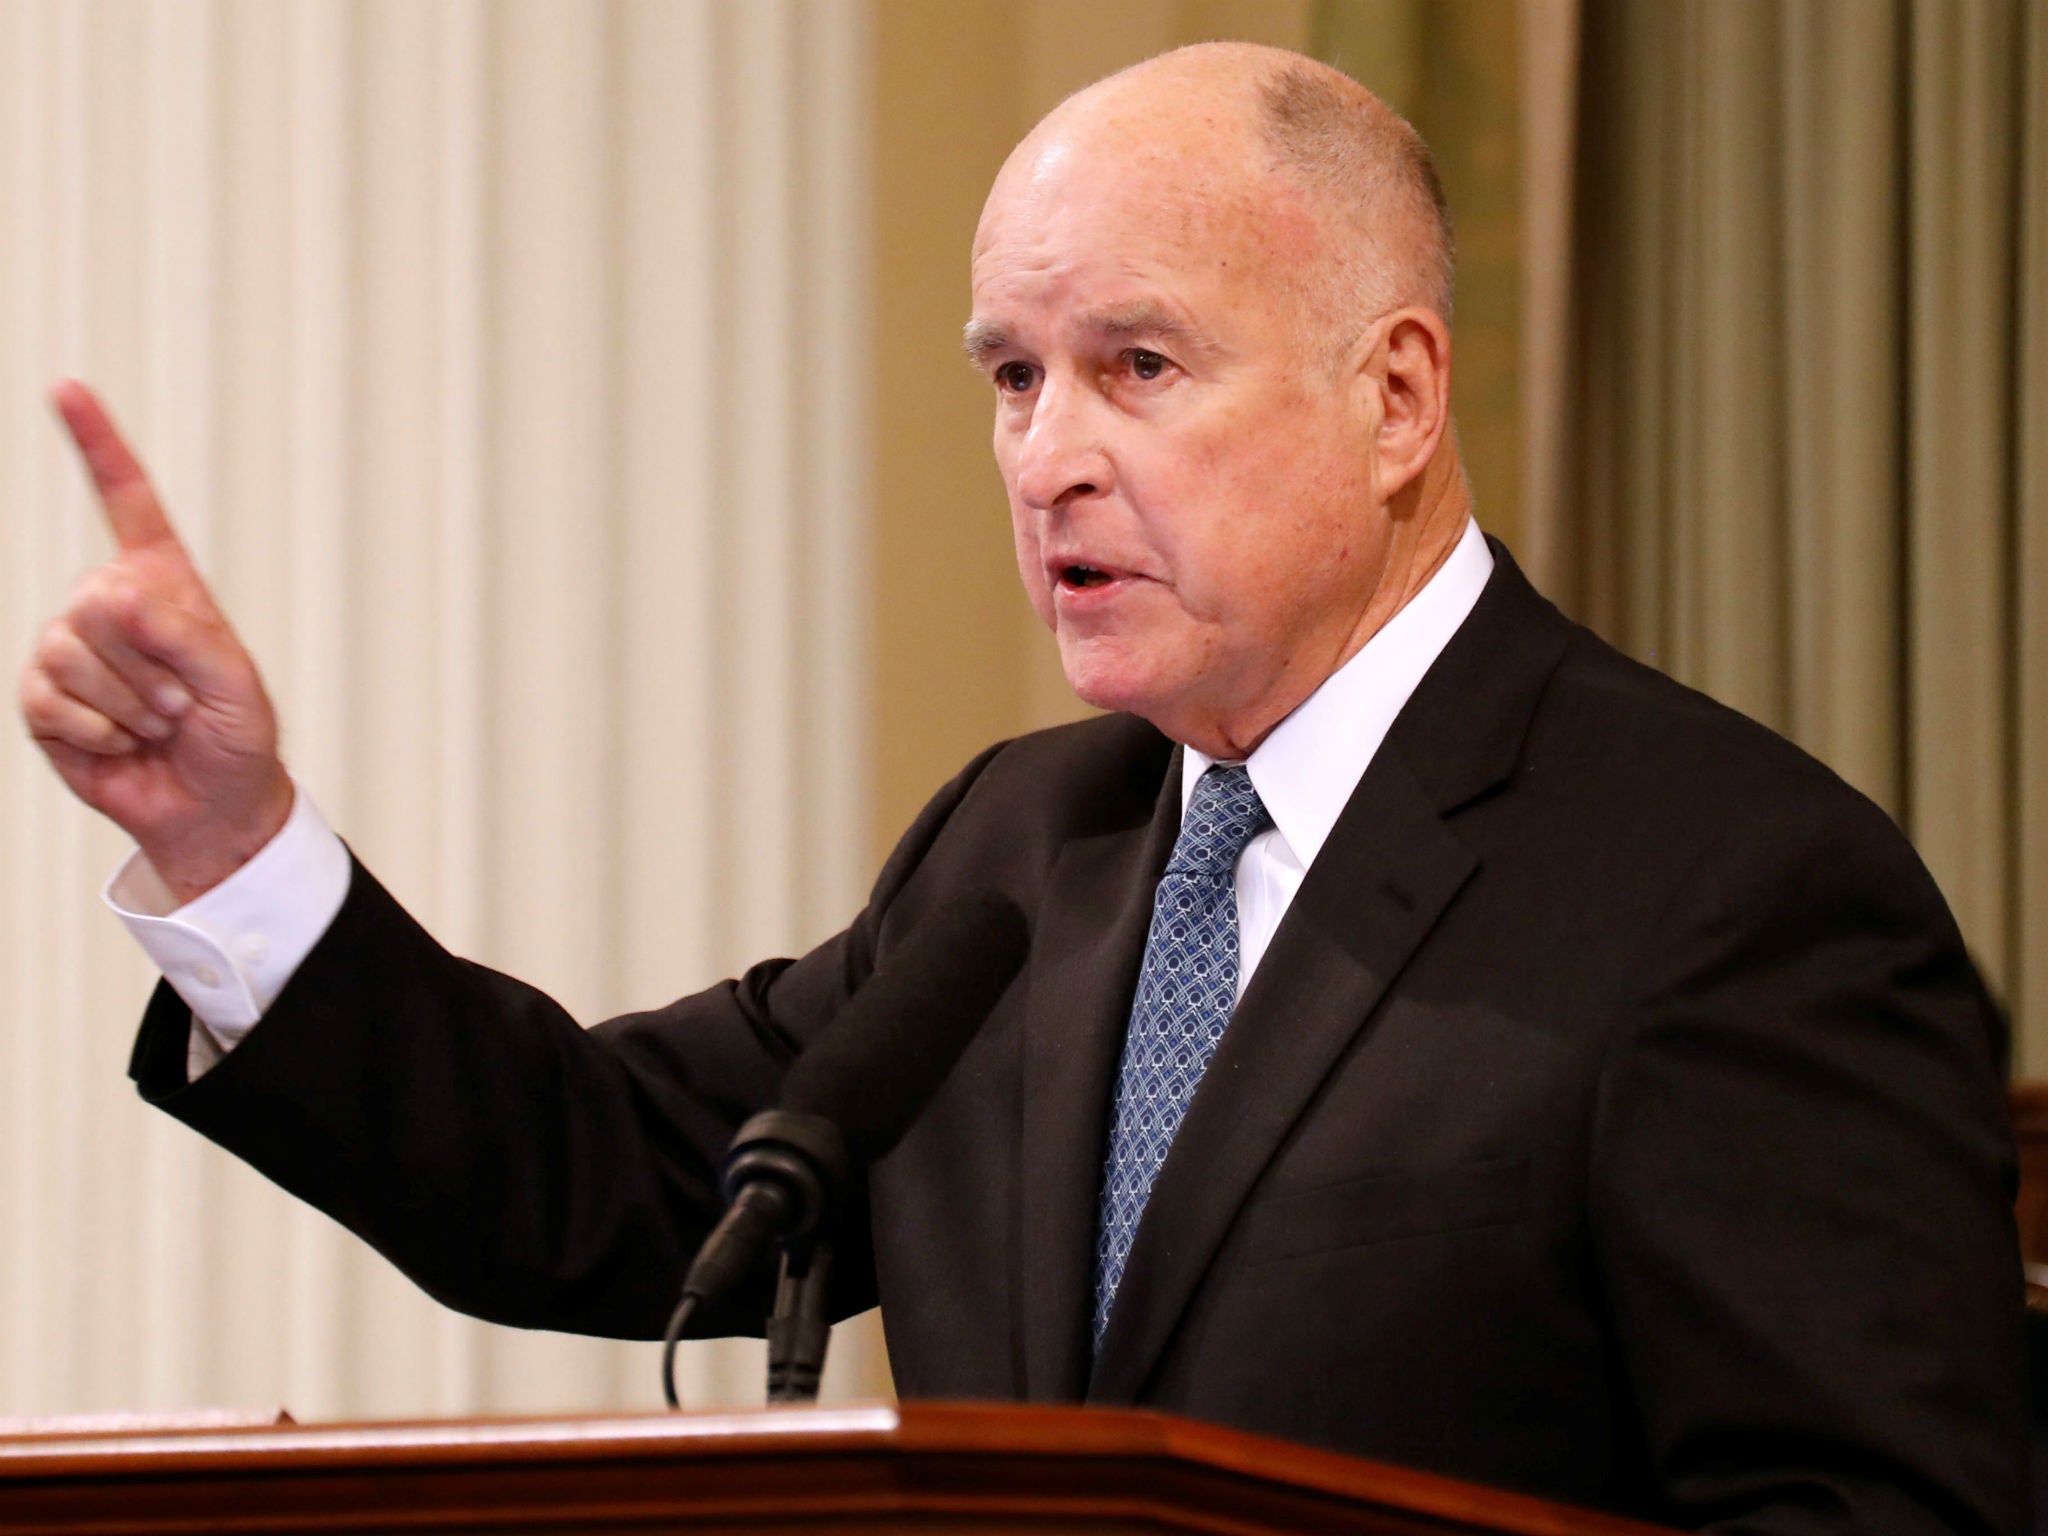 Jerry Brown delivers his final state of the state address in Sacramento, California